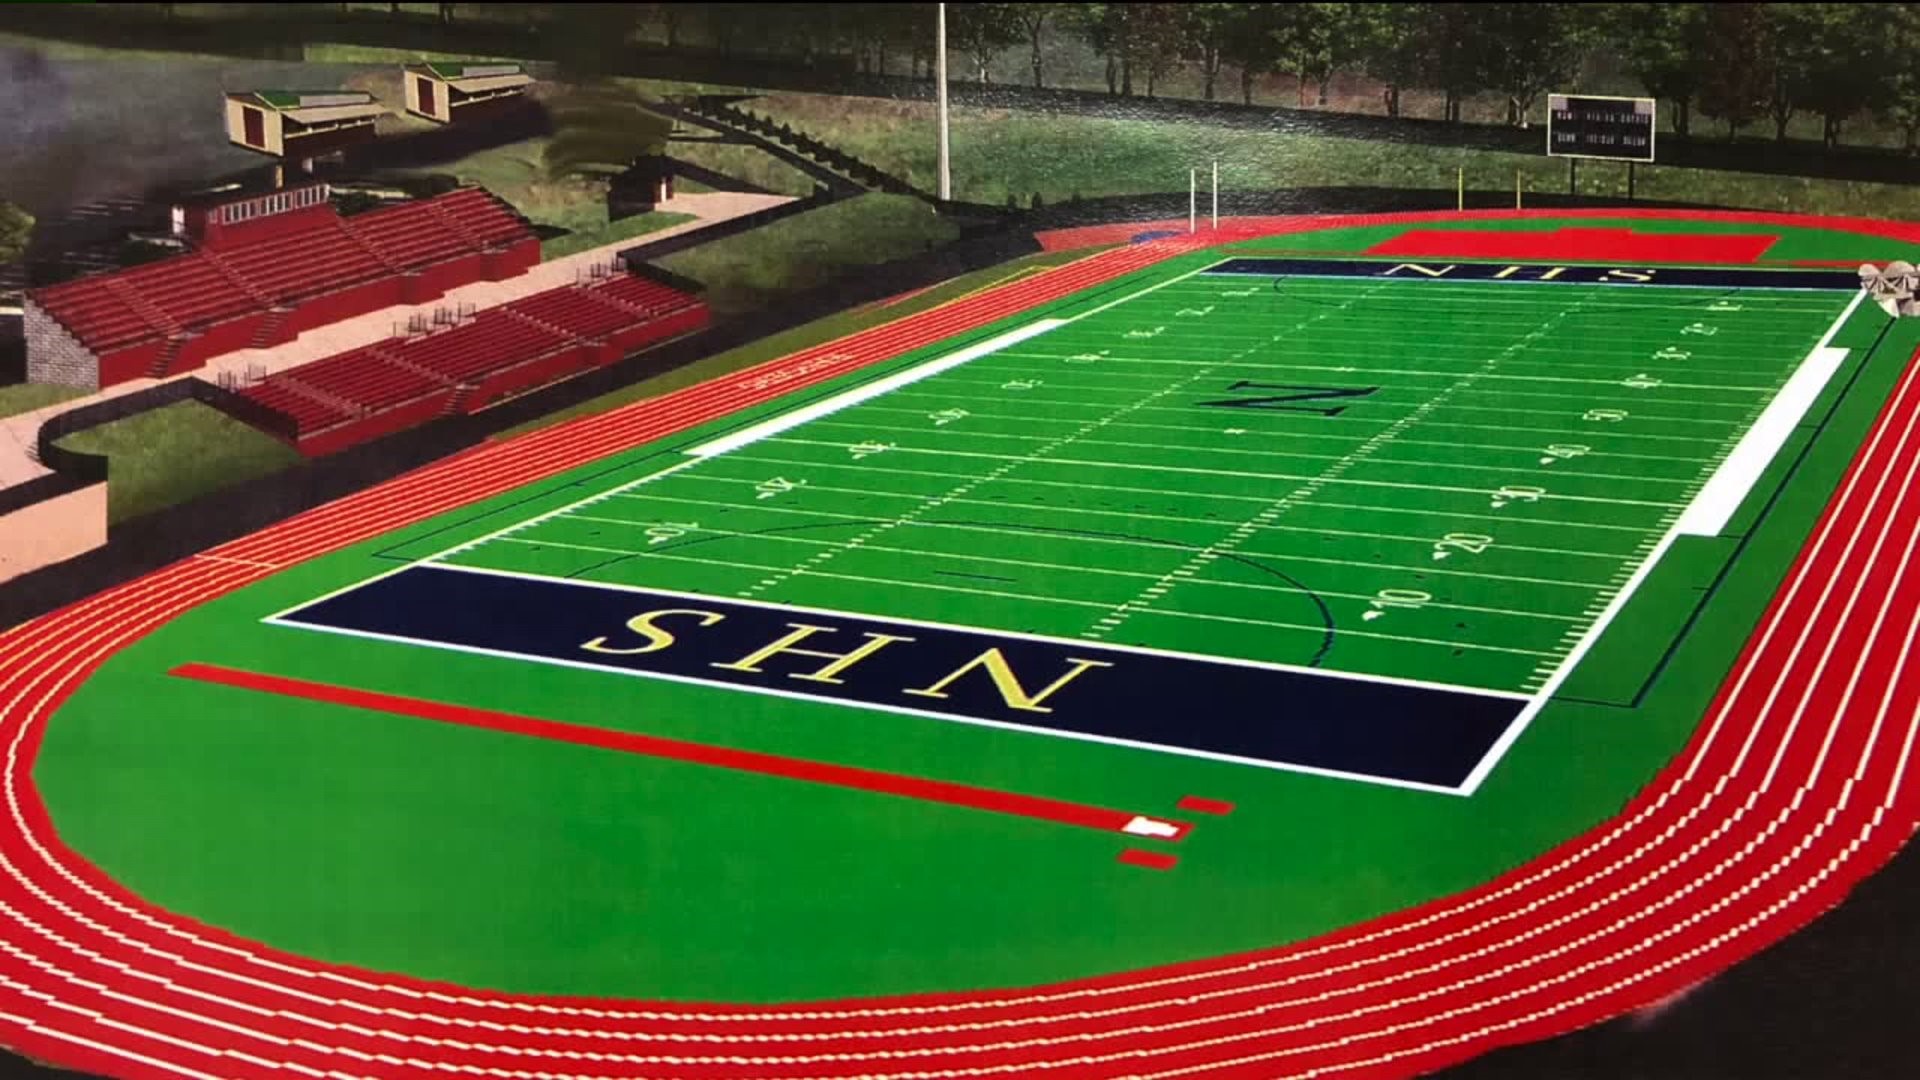 Northwest Area Getting Major Facelift to Athletic Facilities